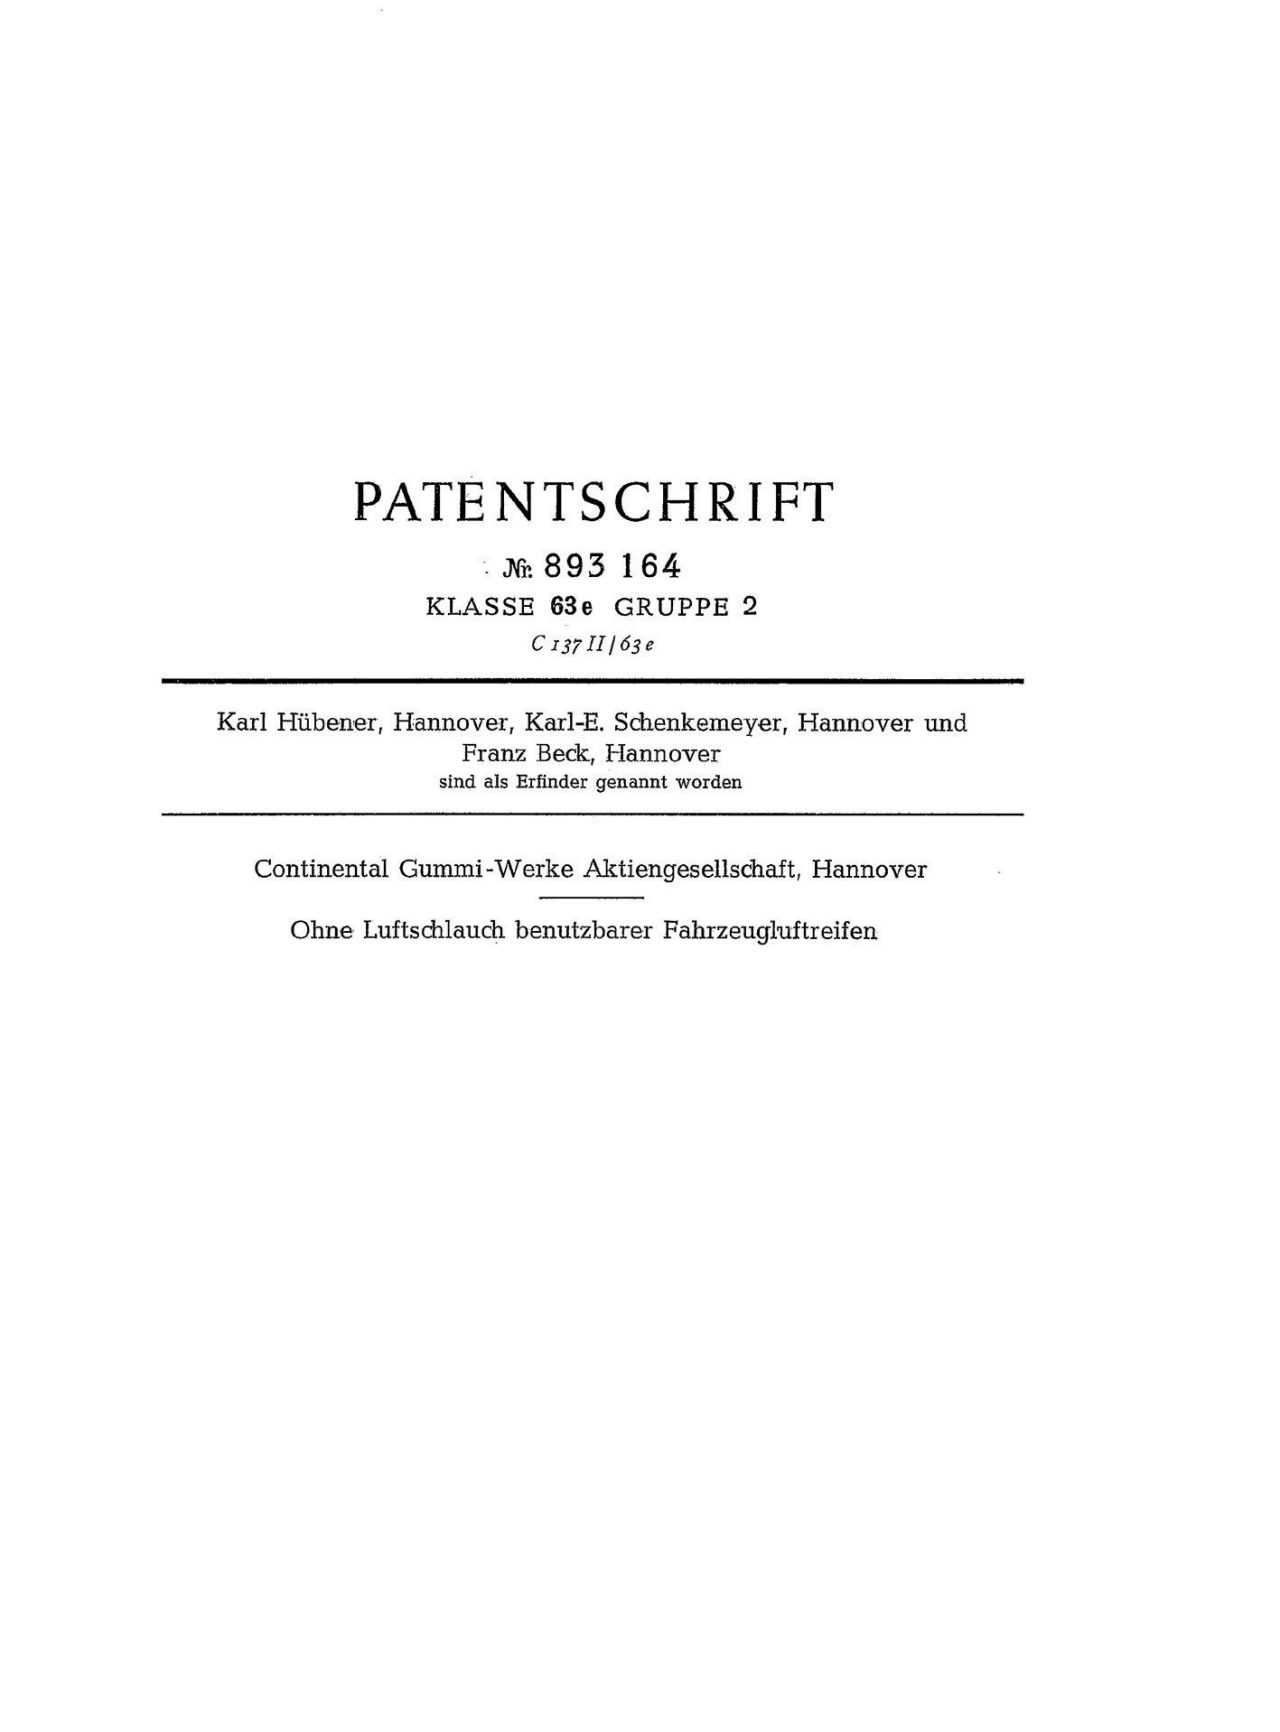 Continental patent specification 1943